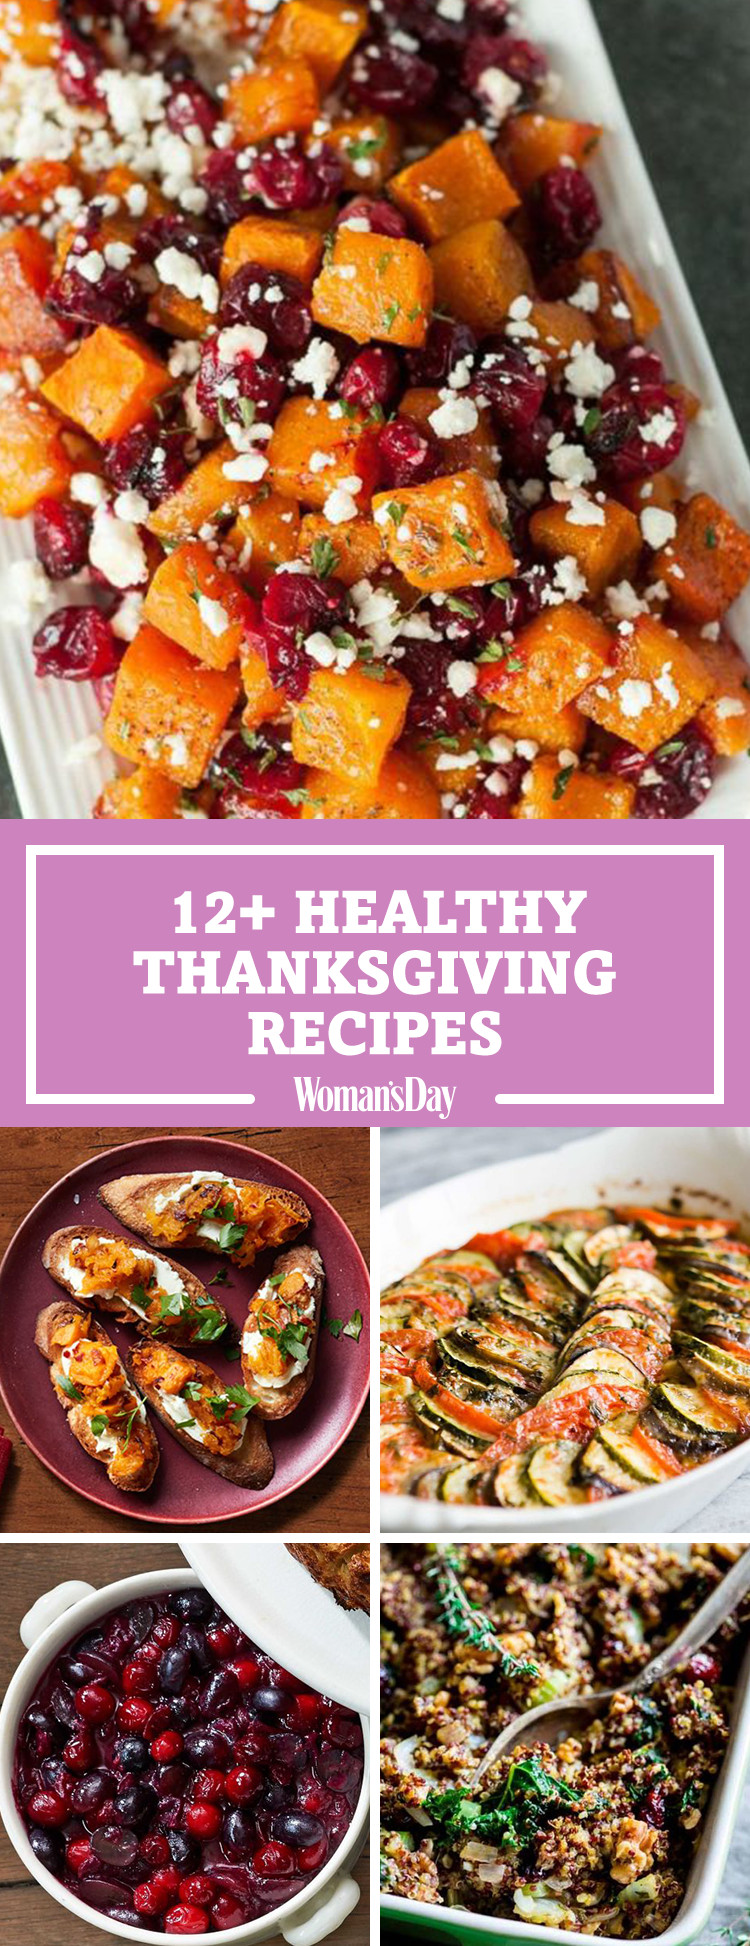 Thanksgiving Dinner Sides Ideas
 16 Healthy Thanksgiving Dinner Recipes Healthier Sides